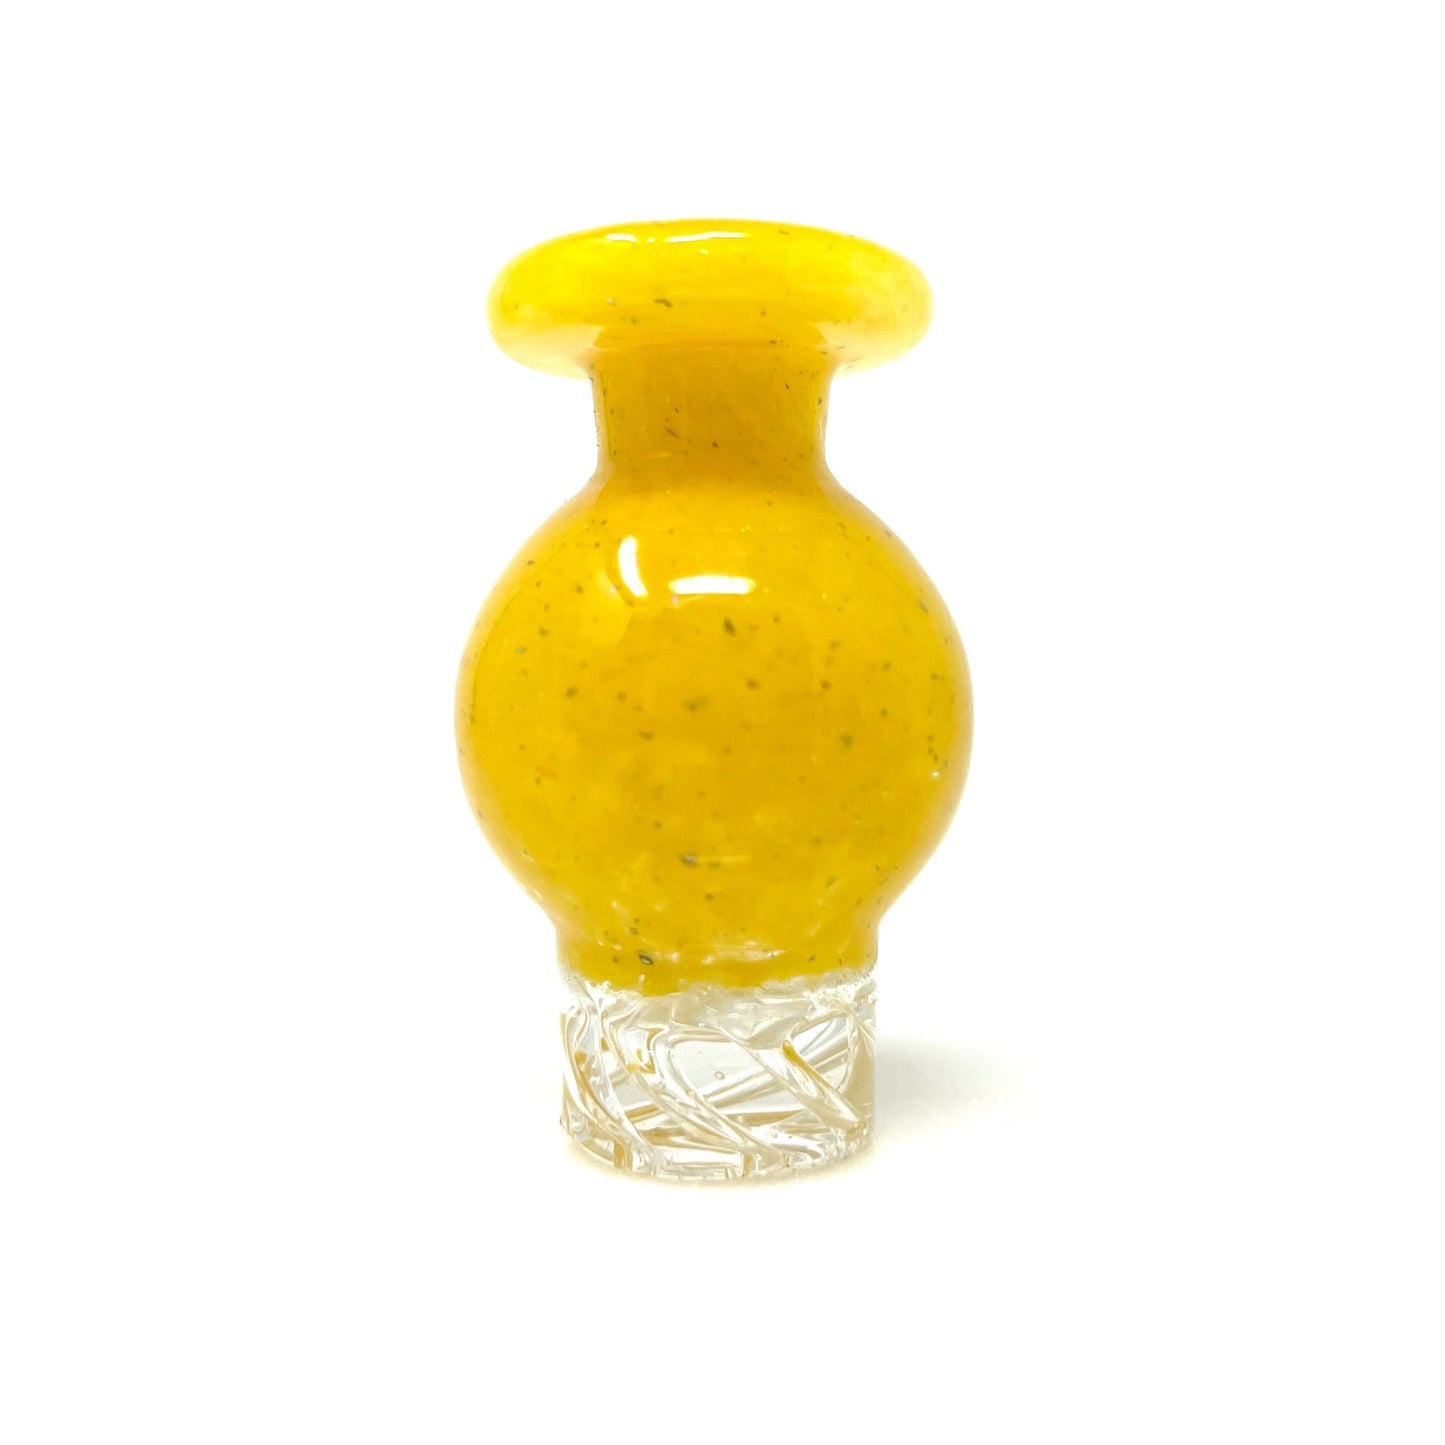 AFM Smoke Carb Cap Golden Yellow Dot Turbo Glass Spinner Carb Cap + 2 Pearls